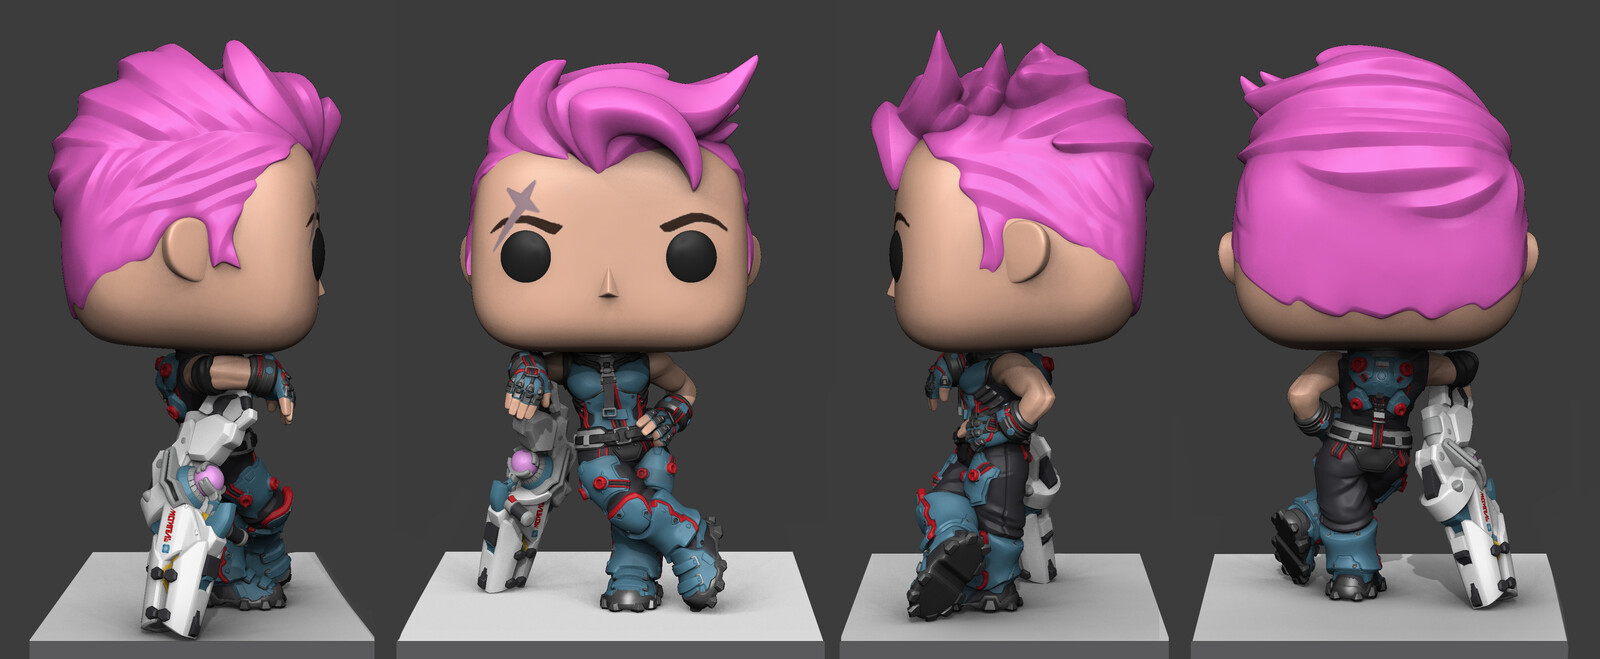 Zarya from Overwatch! It was super cool to be able to work on this IP. Had a lot of fun with the posing and armor details. 